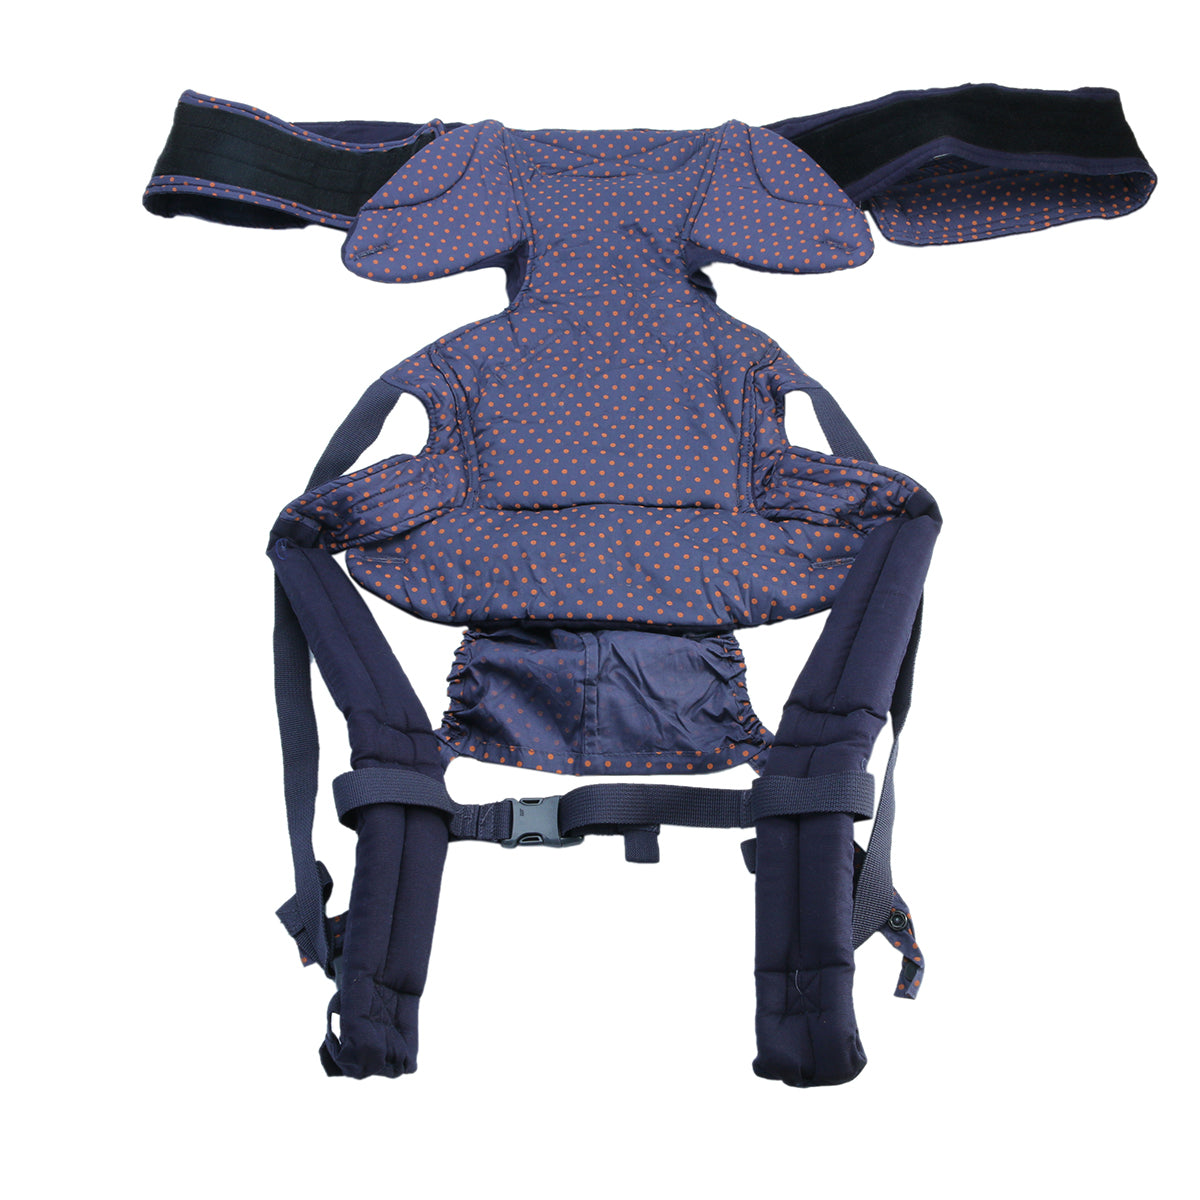 Baby Kids Safety Harness Cotton Walking Rein Carrier Breathable Babys Strap Baby Carriers